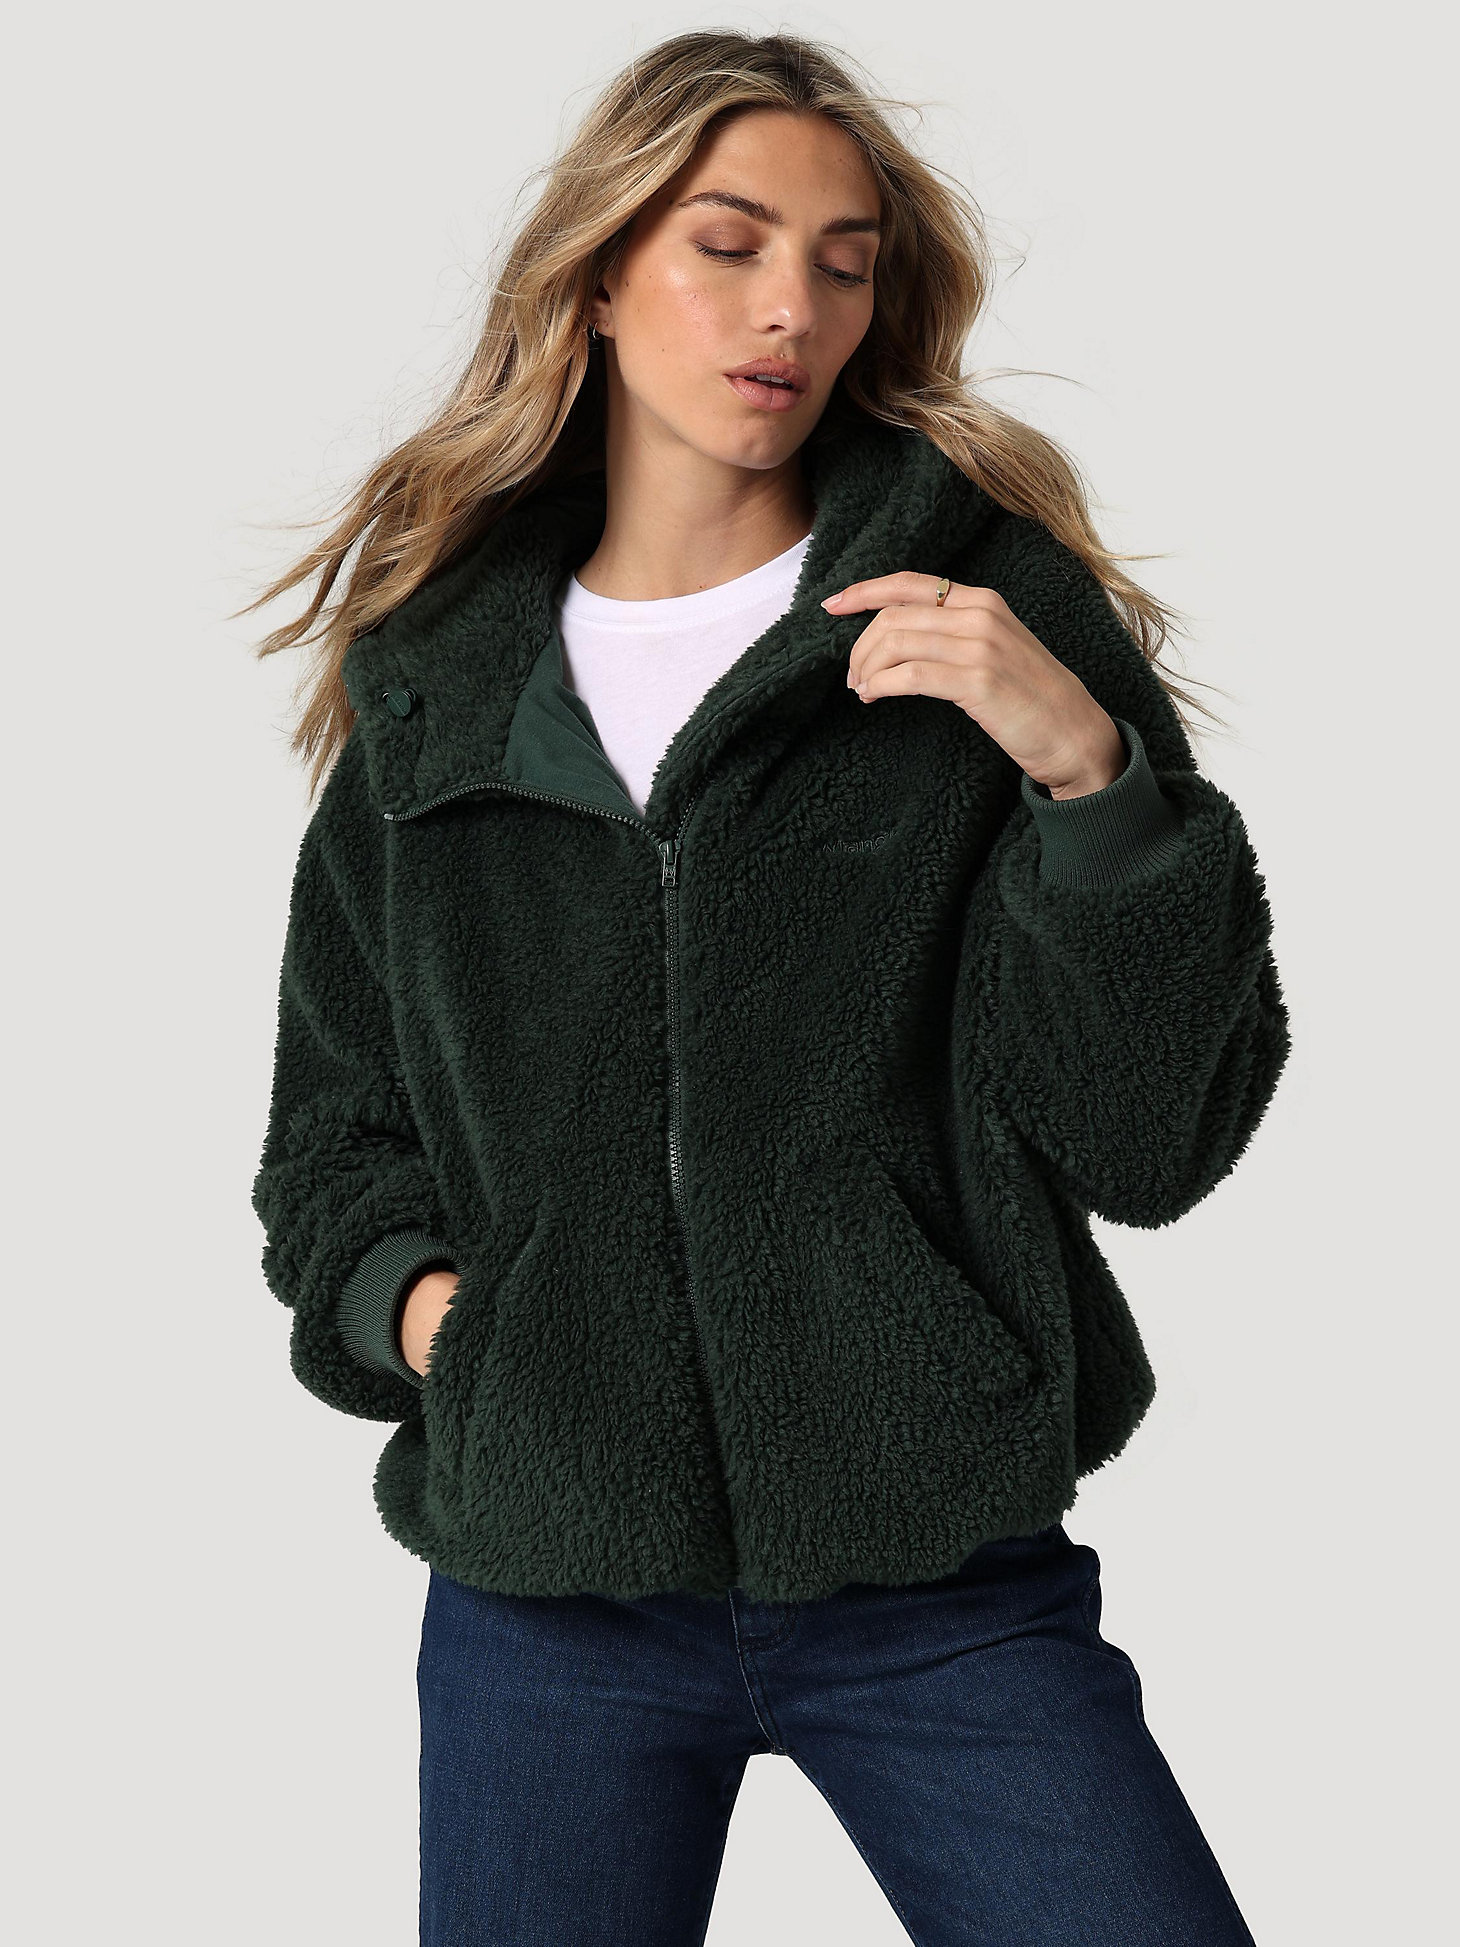 Women's Hooded Sherpa Jacket in Sycamore Green alternative view 5